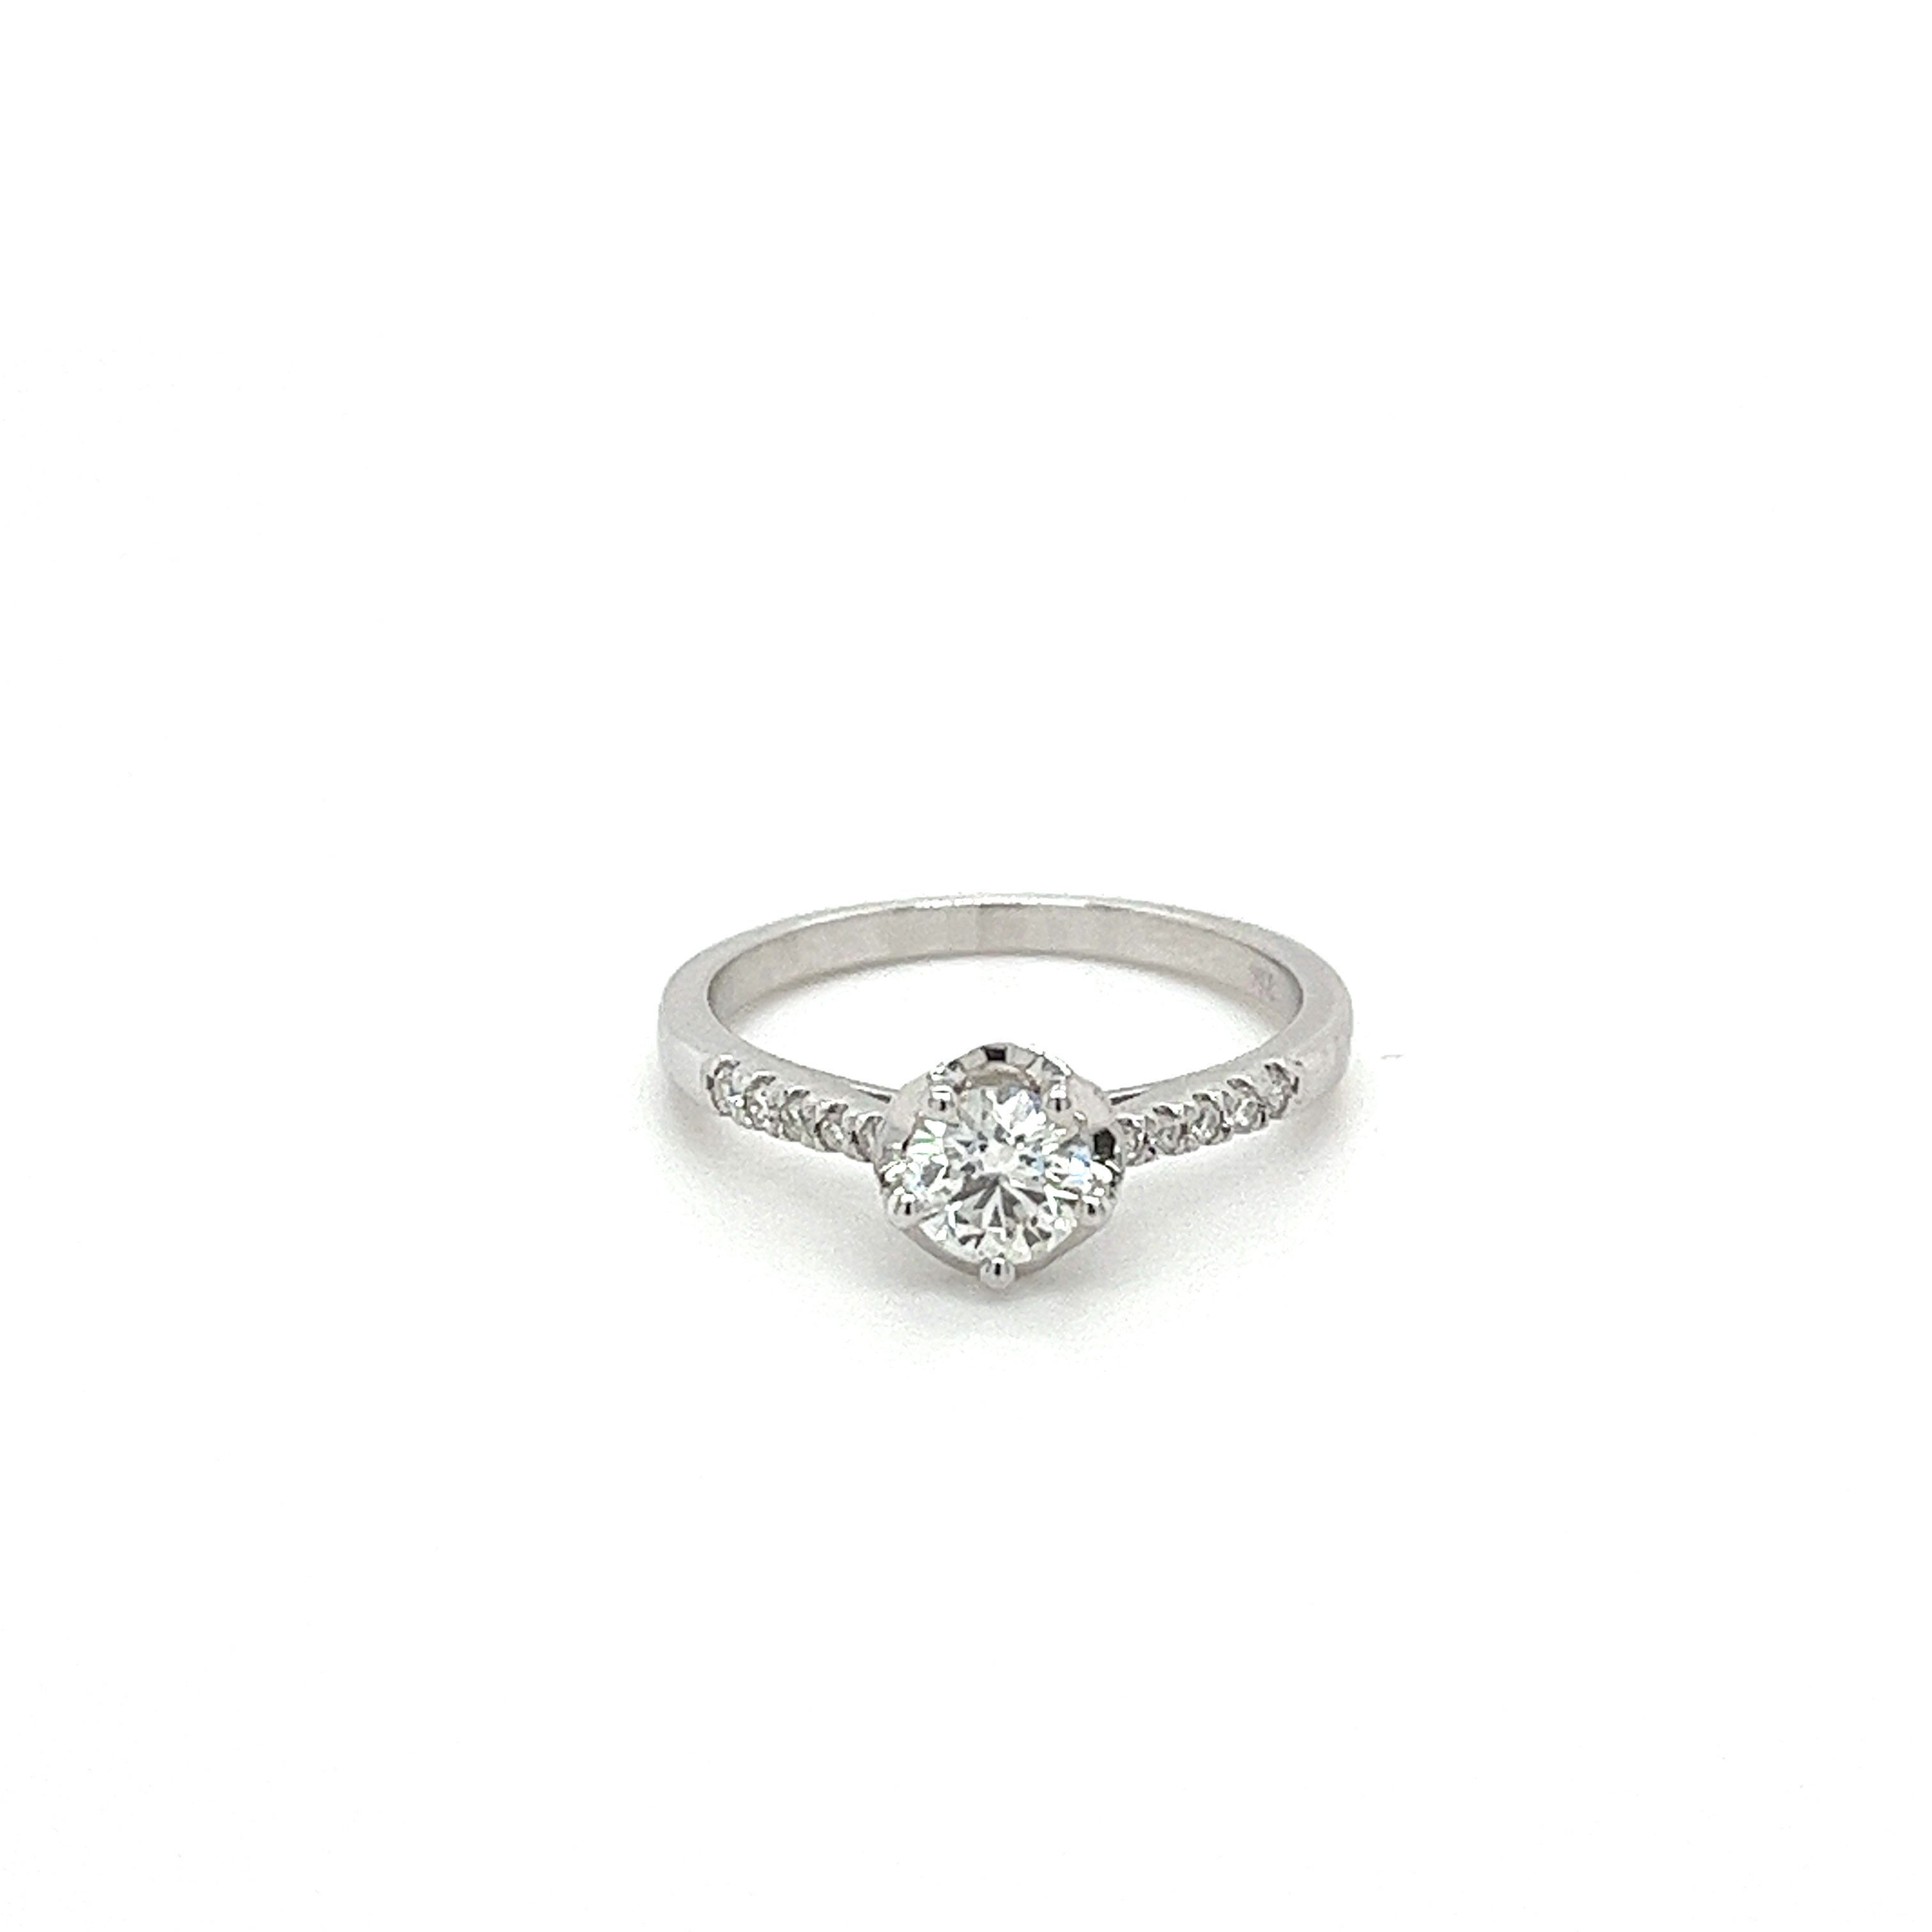 0_44-CTTW-Natural-Round-Cut-Diamond-Engagement-Ring-with-Vintage-Halo-in-18K-White-Gold-Engagement-Ring.jpg